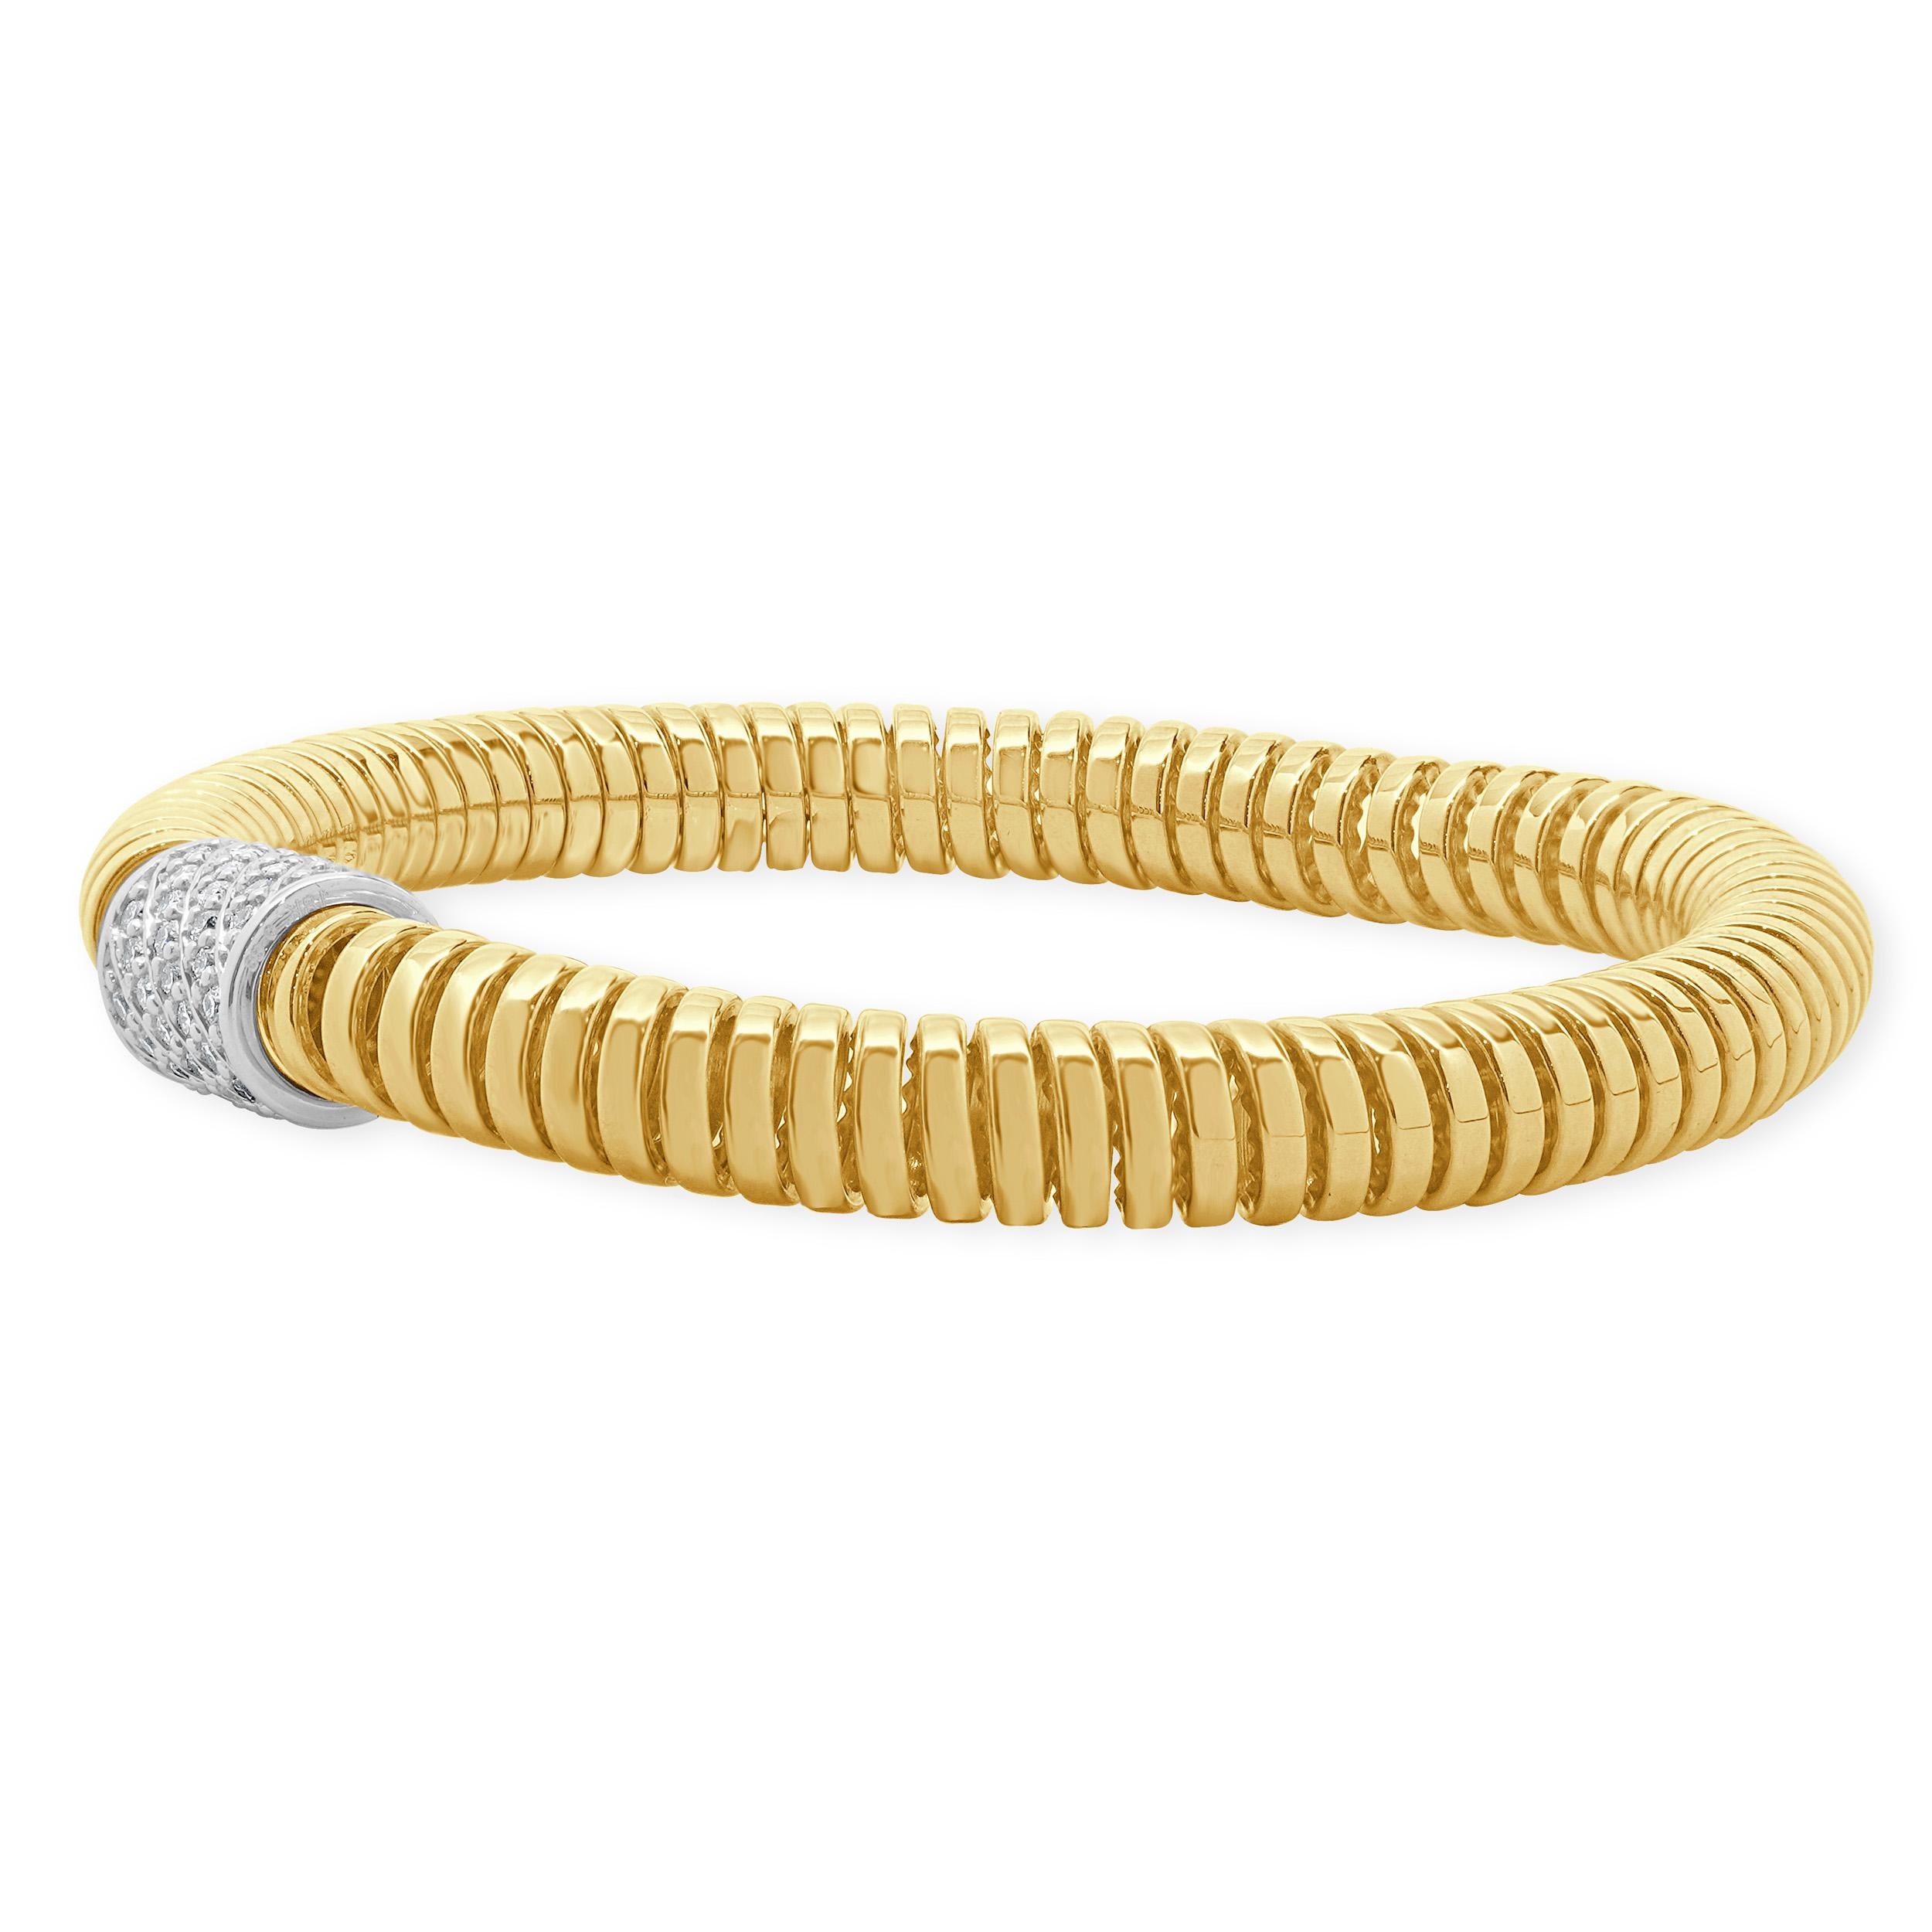 18 Karat Yellow & White Gold Pave Diamond Stretch Bracelet In Excellent Condition For Sale In Scottsdale, AZ